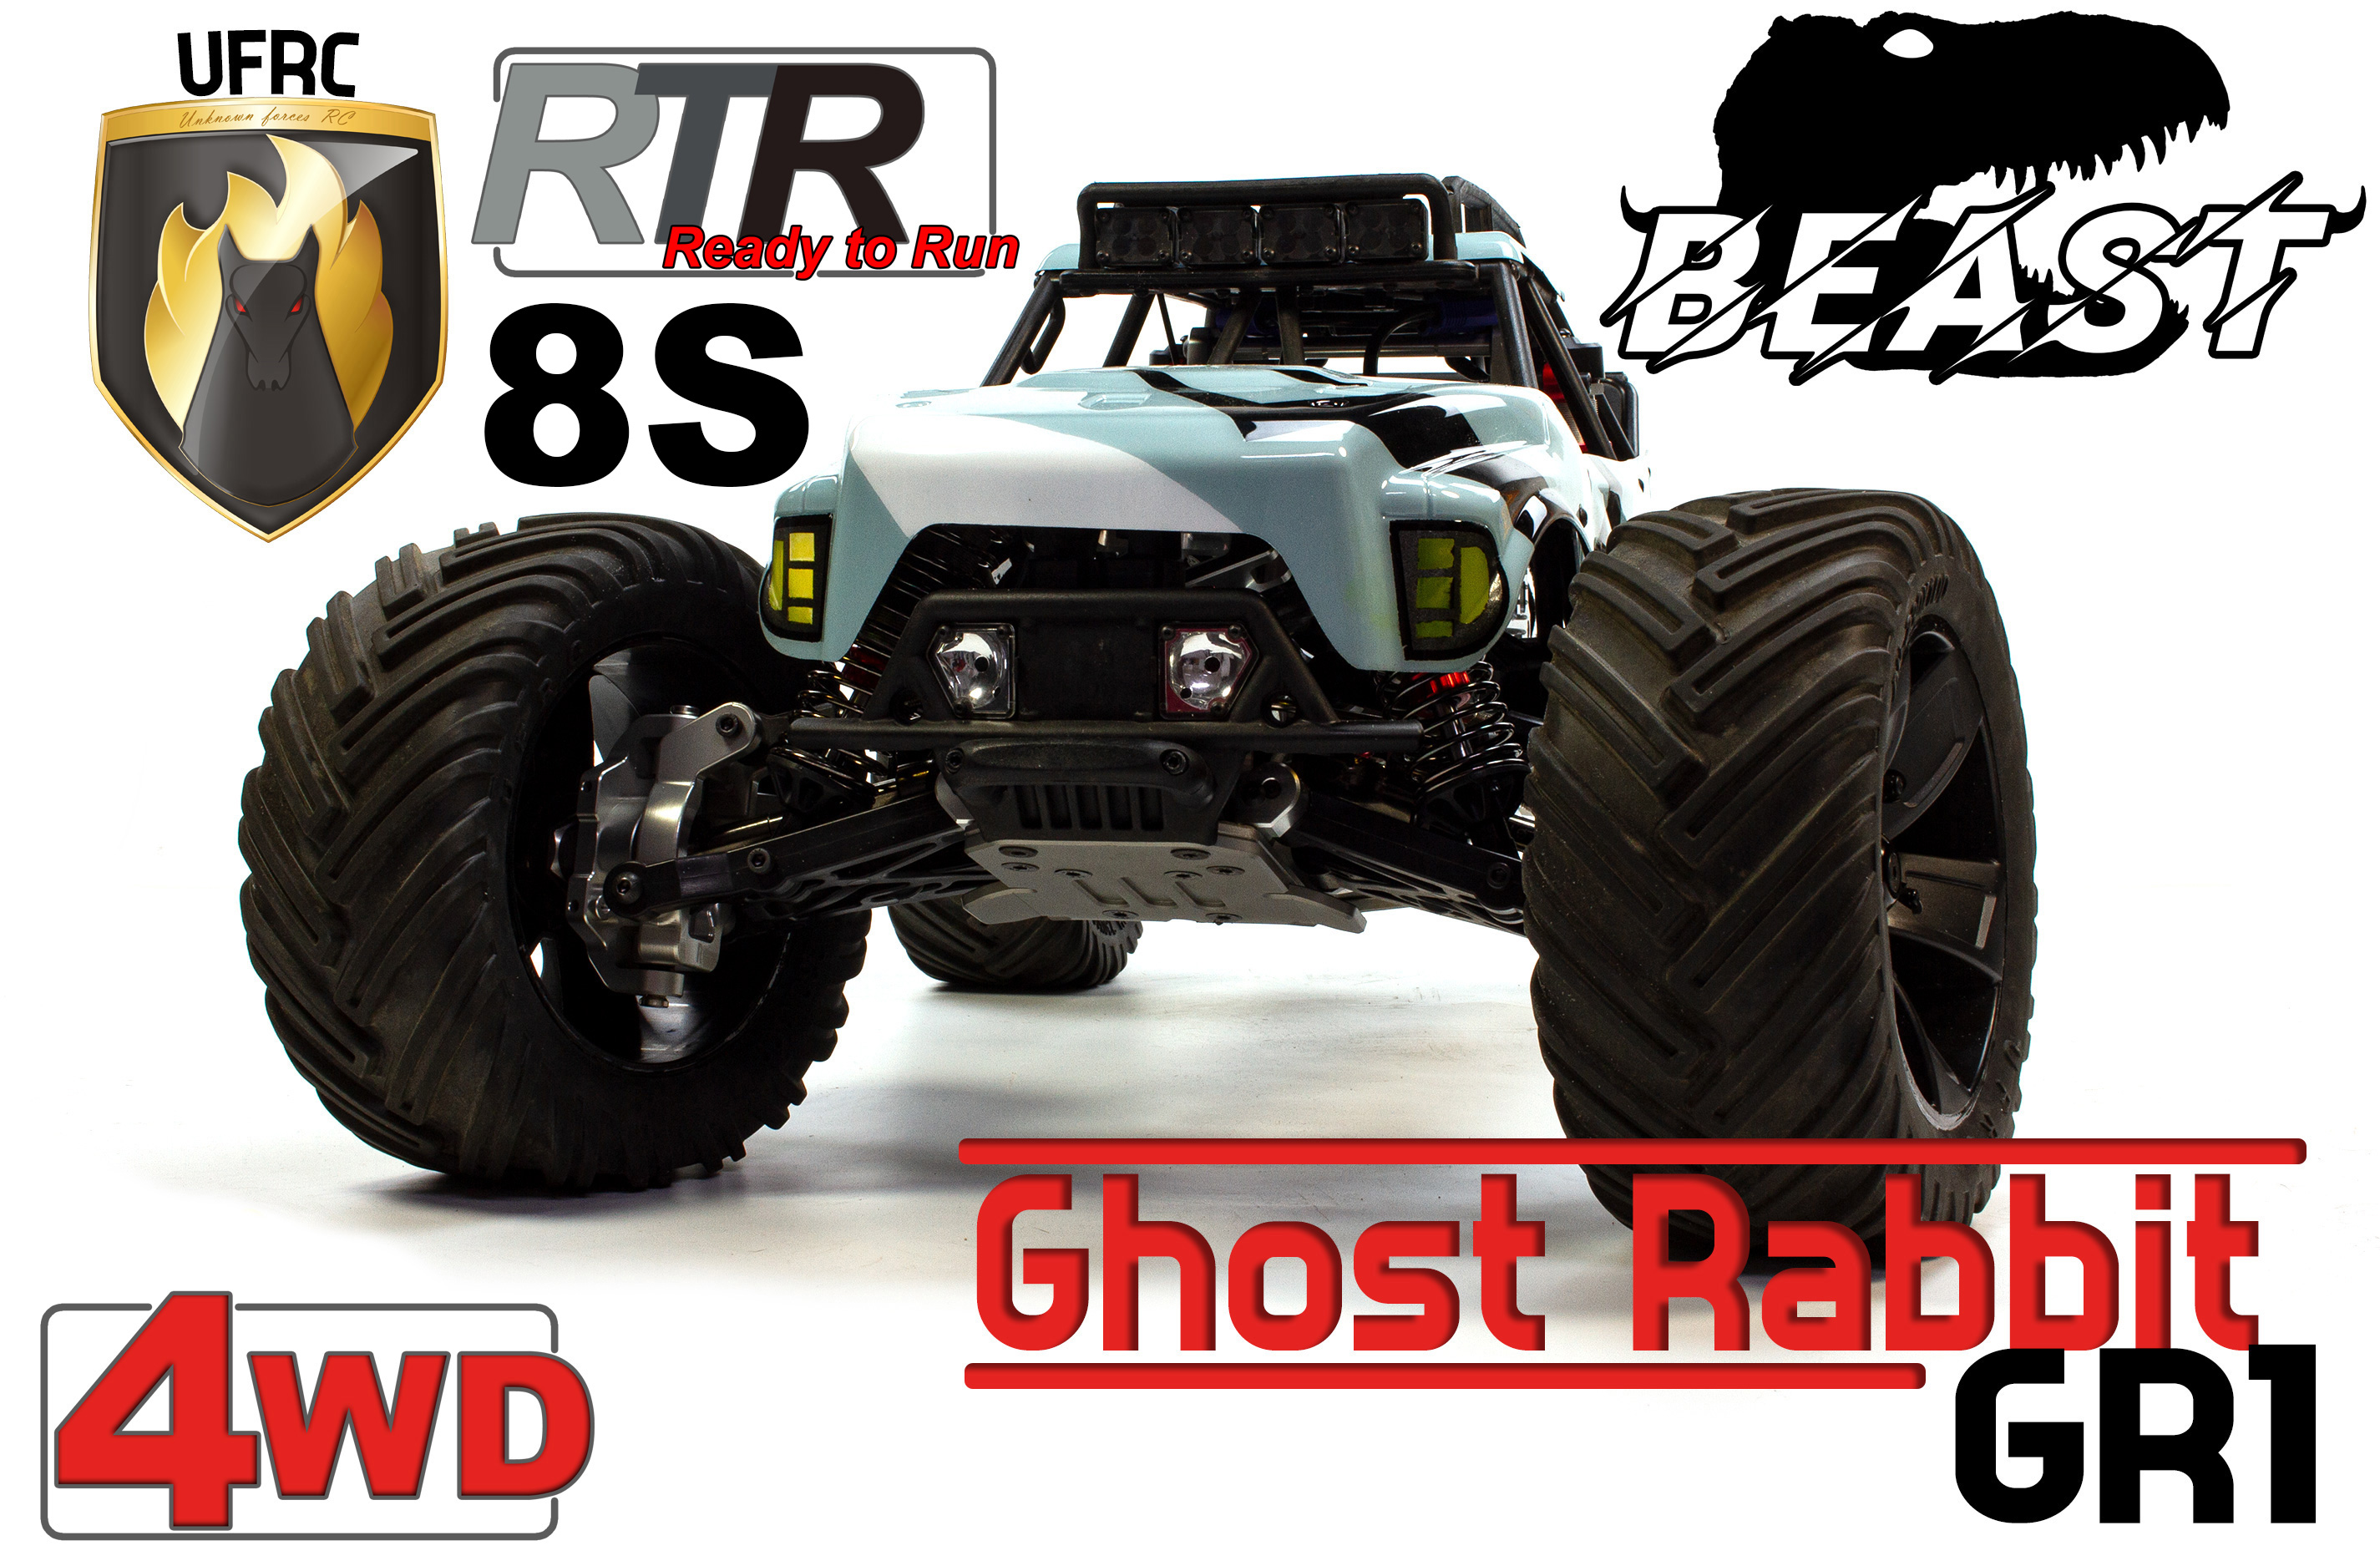 UFRC Ghost Rabbit GR1 4WD 1:5 Brushless Buggy 8S, RTR Version